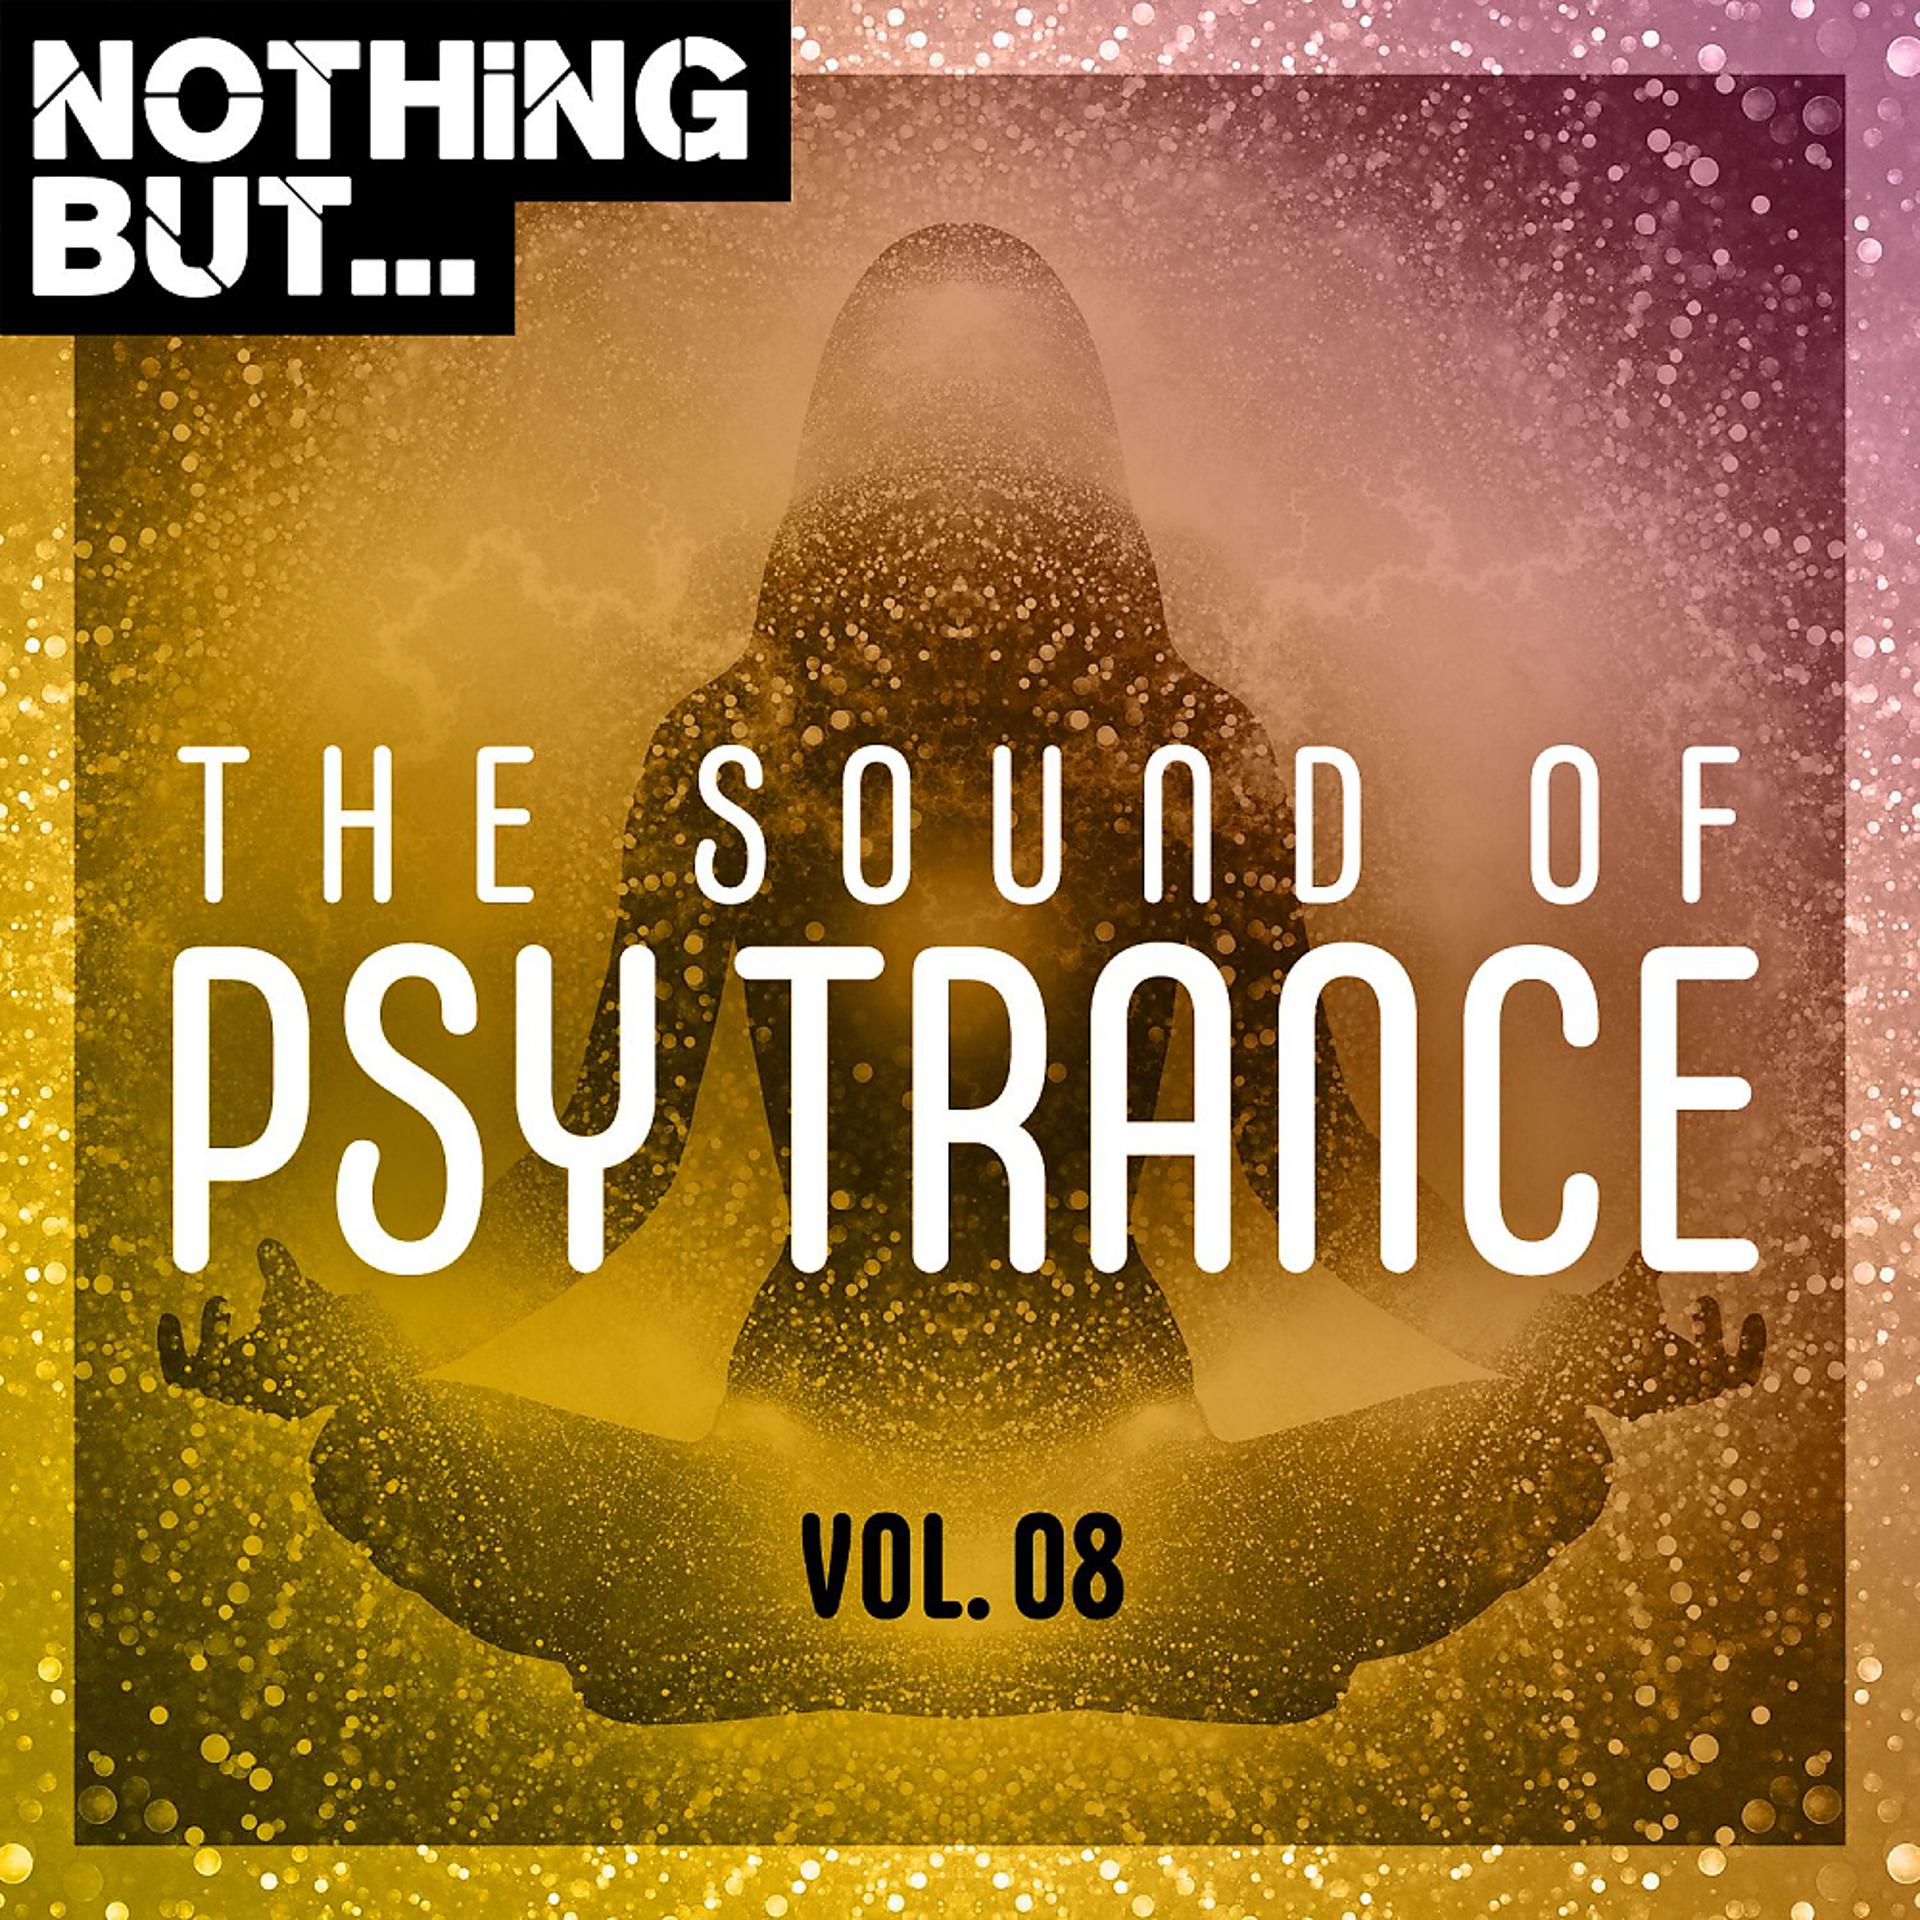 Постер альбома Nothing But... The Sound of Psy Trance, Vol. 08